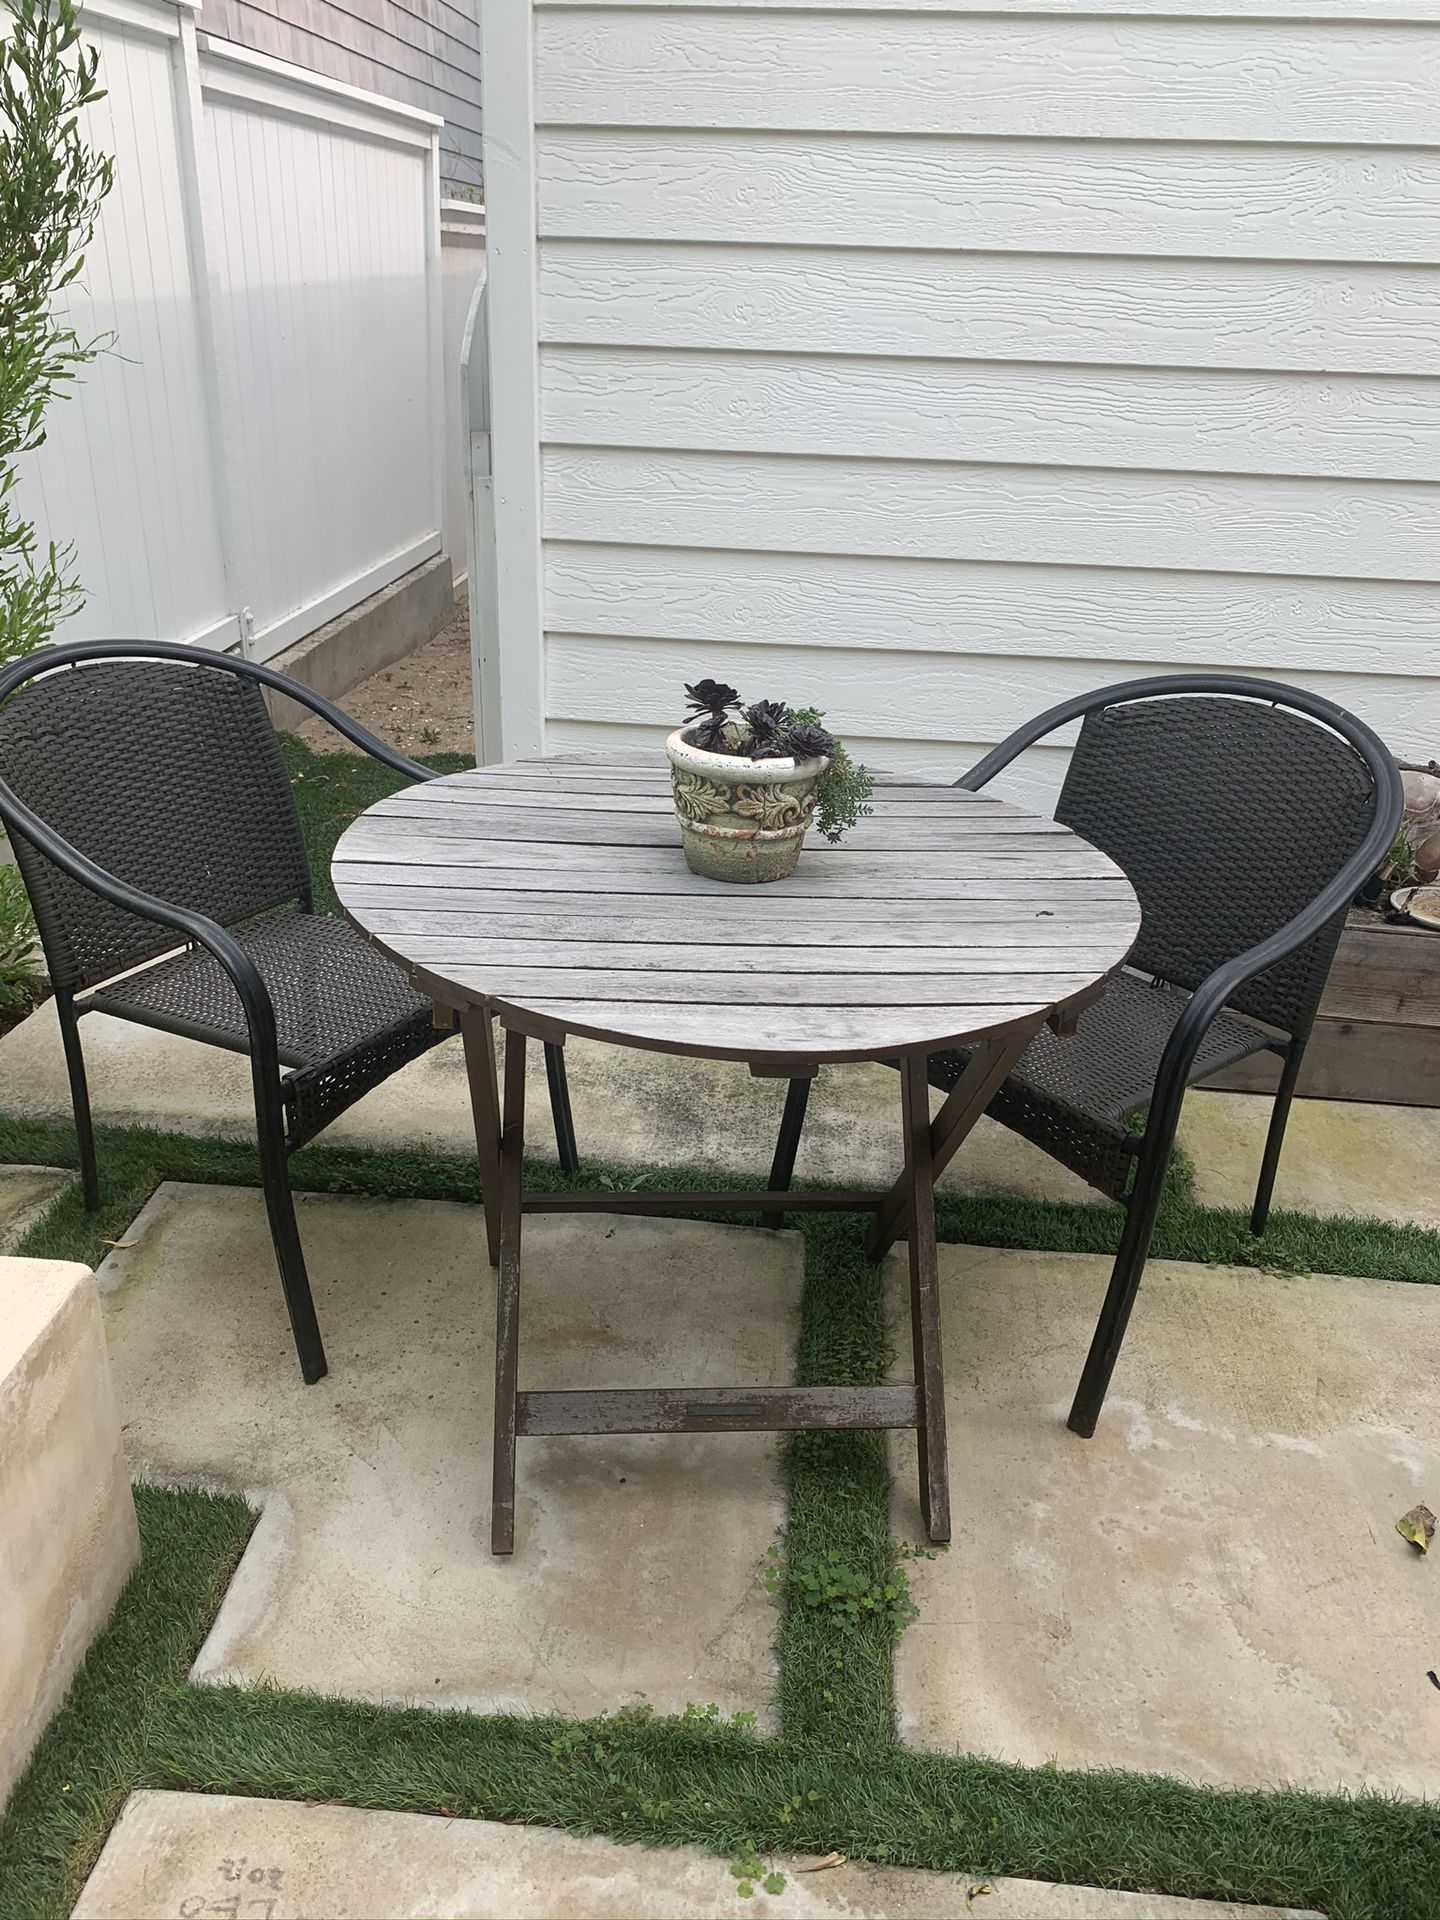 Pottery Barn Chesapeake Outdoor Foldable Table & Chairs